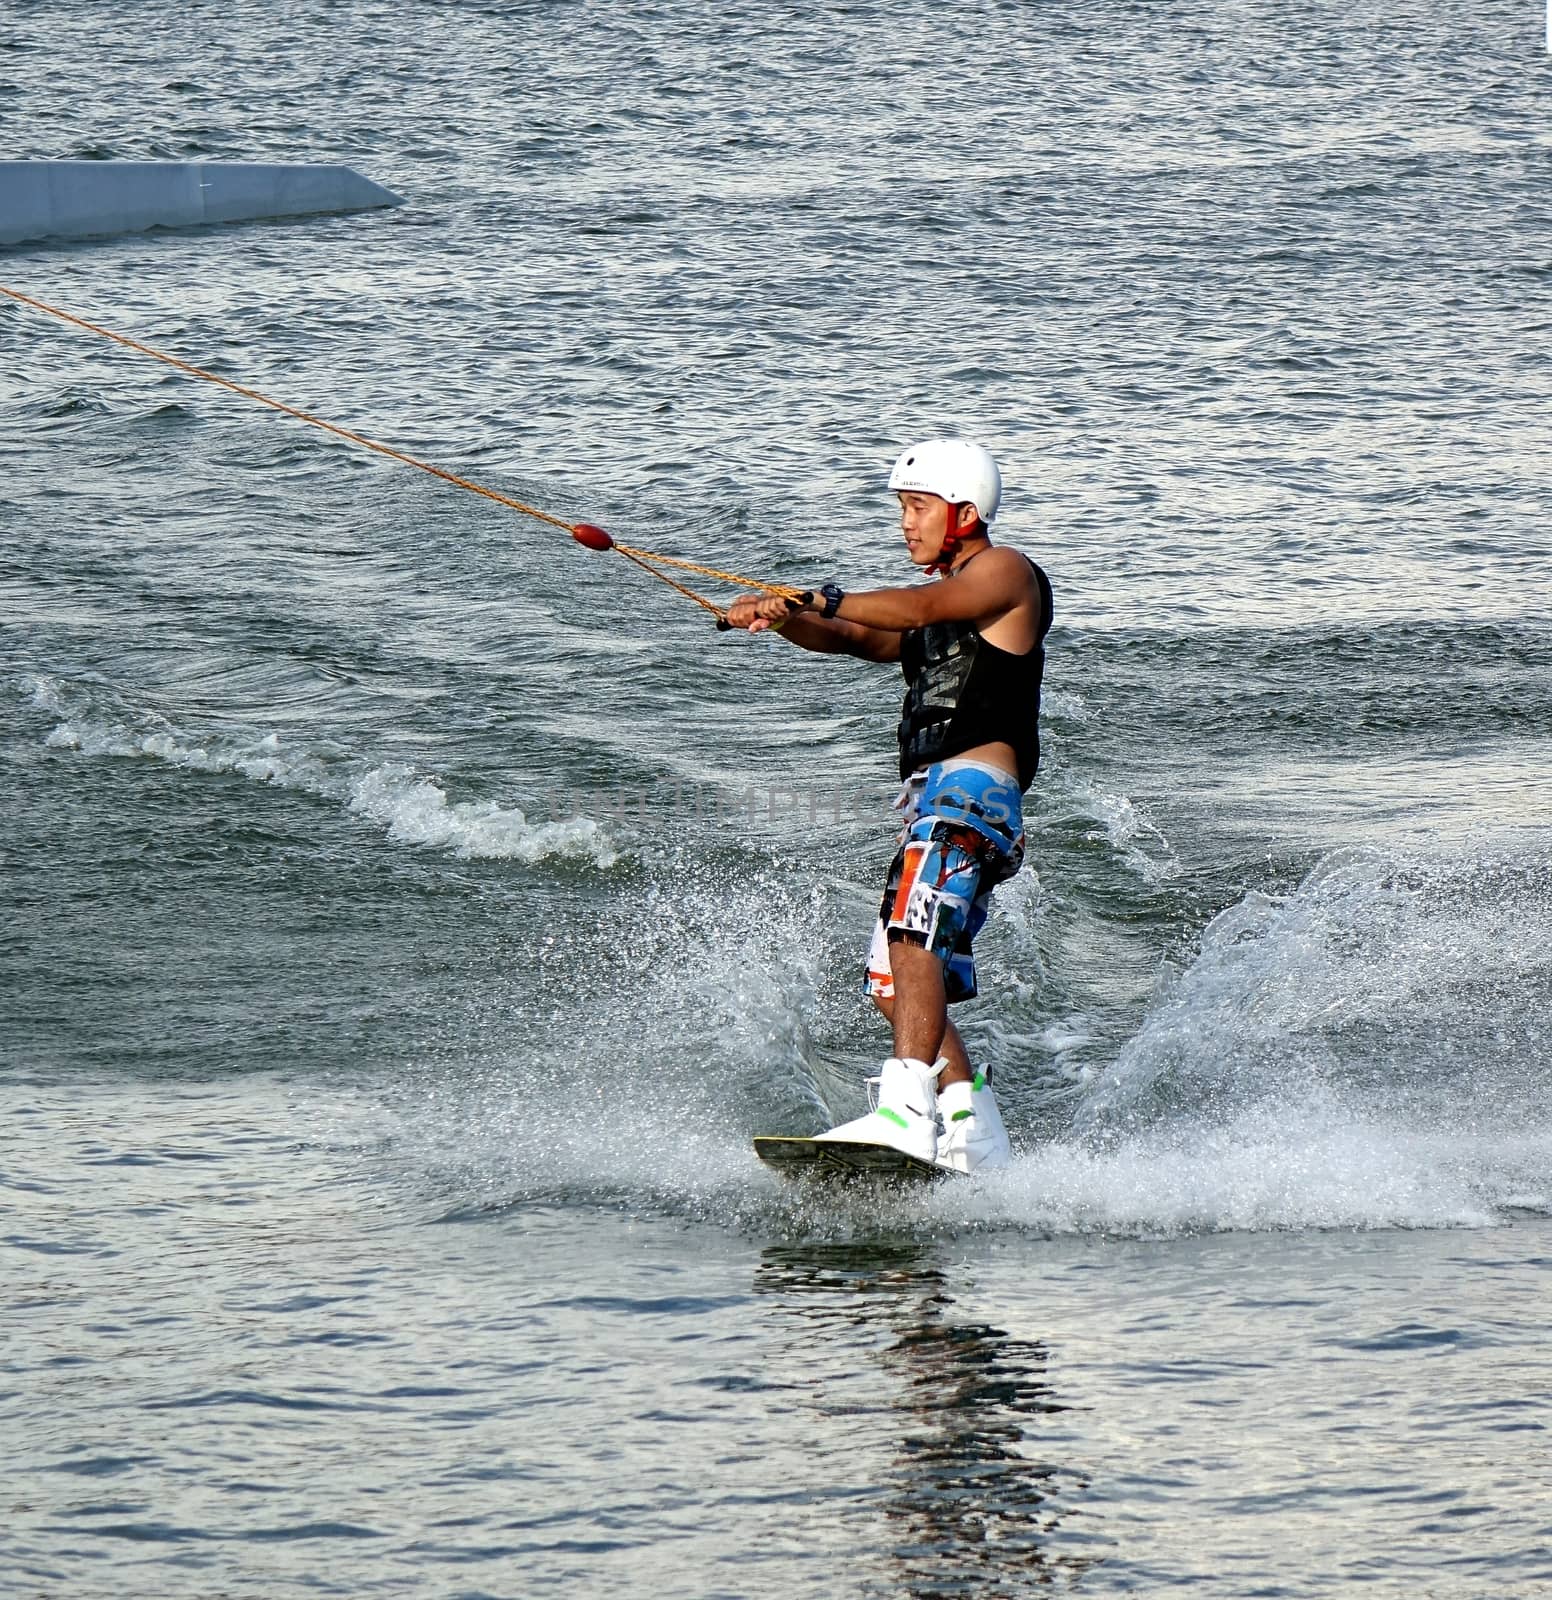 KAOHSIUNG, TAIWAN -- MAY 25, 2014: An unidentified male enjoys wakeboarding on the Lotus Lake in Kaohsiung.